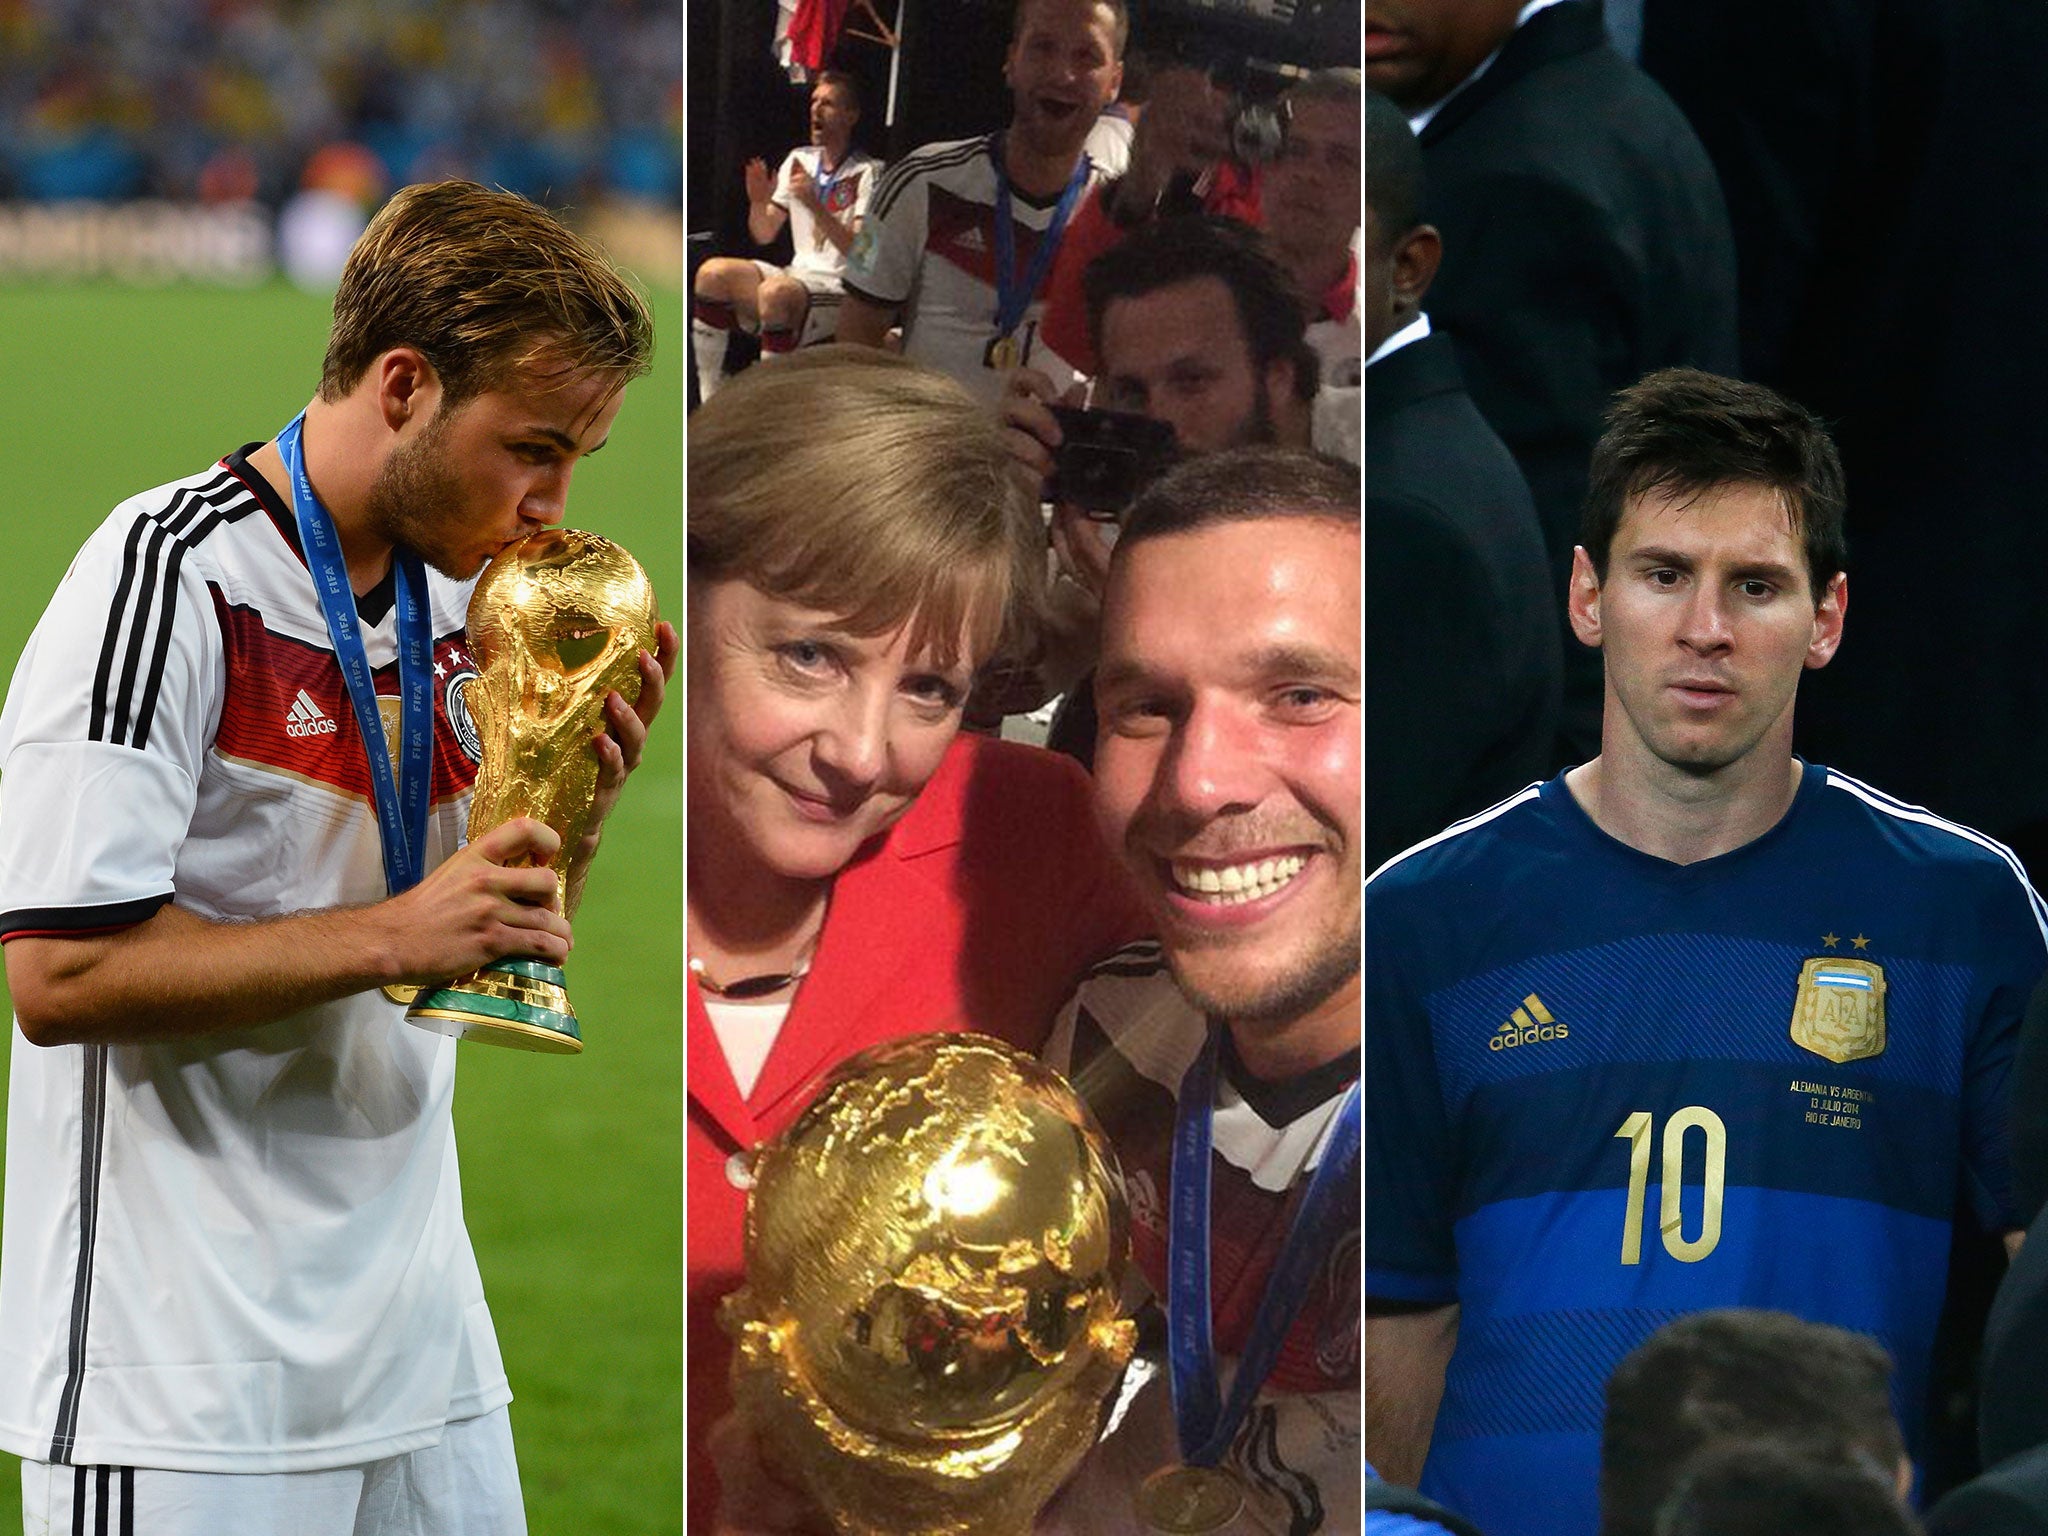 Mario Gotze kisses the World Cup, Angela Merkel poses with Lukas Podolski, and Lionel Messi walks off the stage after Argentina's defeat